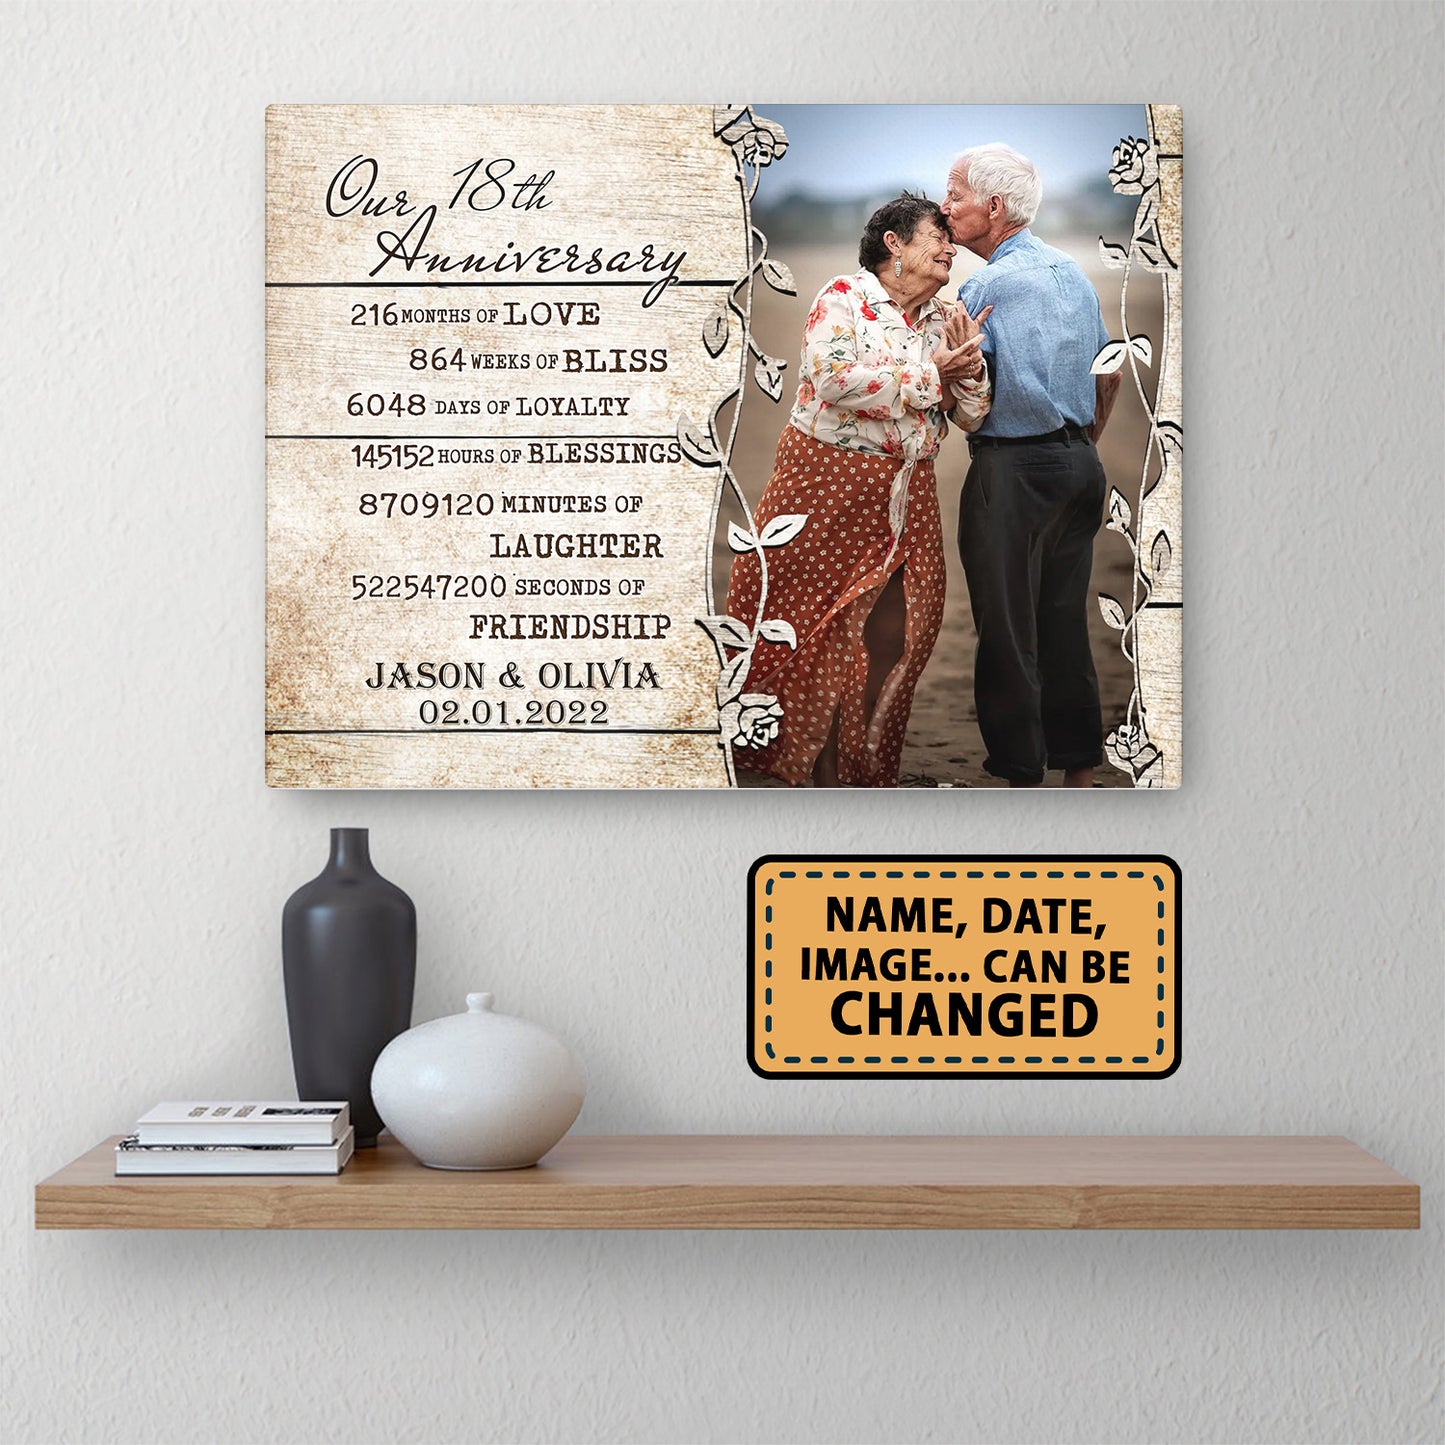 Our 18th Anniversary Timeless love Valentine Gift Personalized Canvas